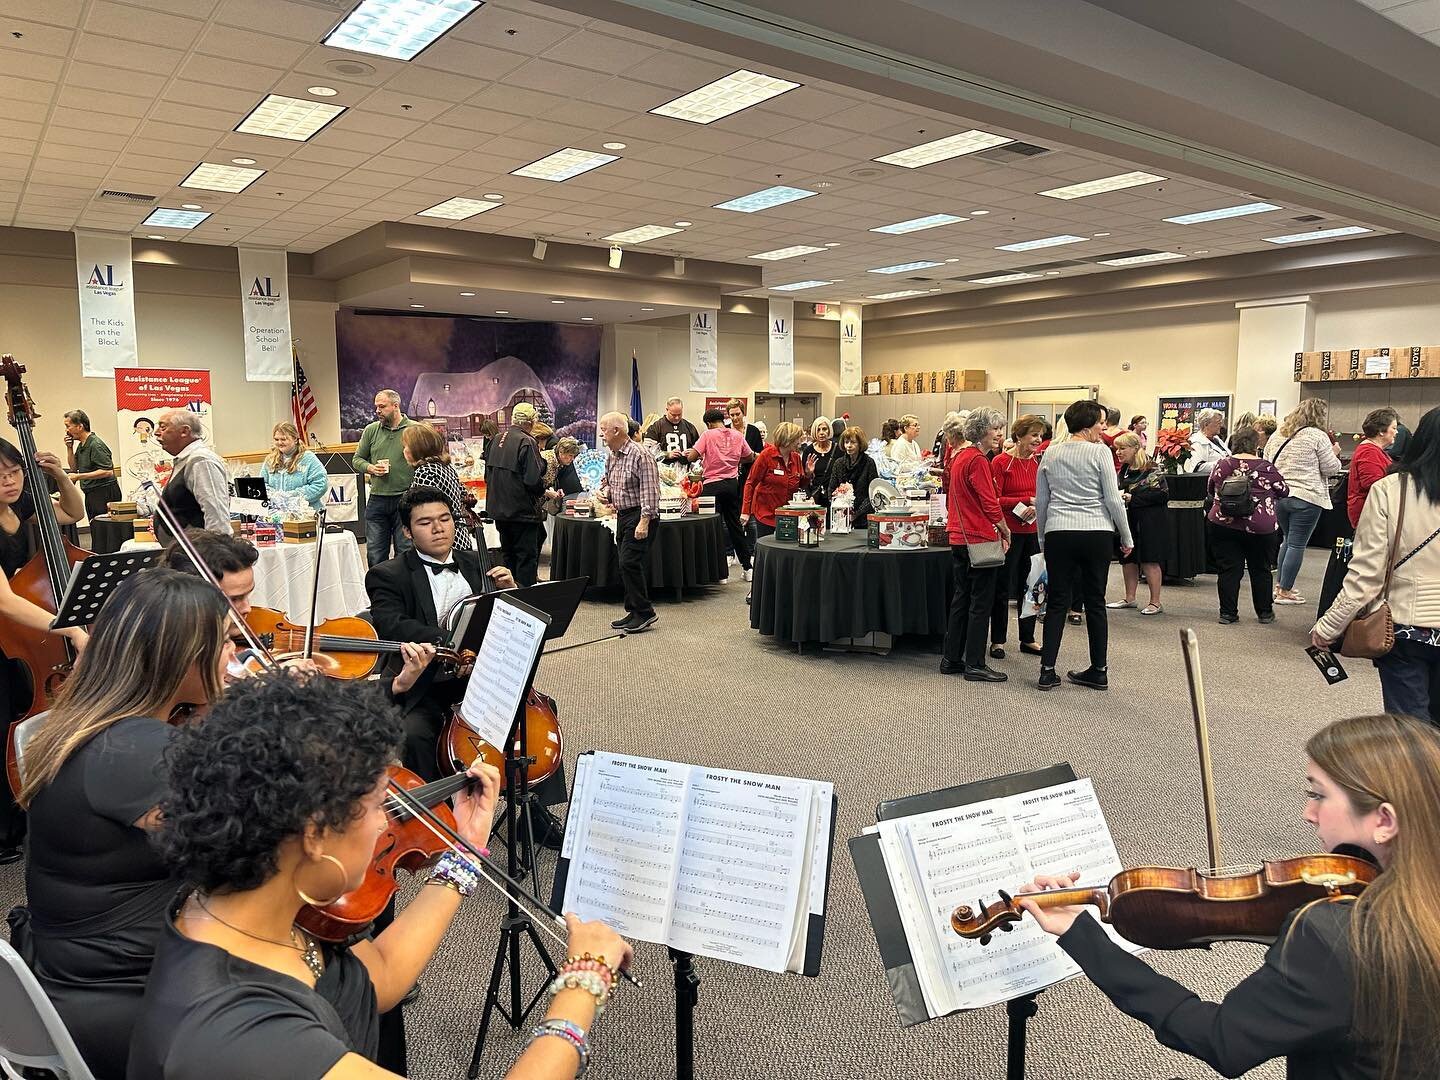 Beautiful Event at the Assistance League of Las Vegas Thrift Shop!! Thank you for having us! 🙏 🎶 🎻 

@assistanceleaguelasvegas
@assistanceleaguelvthriftshop